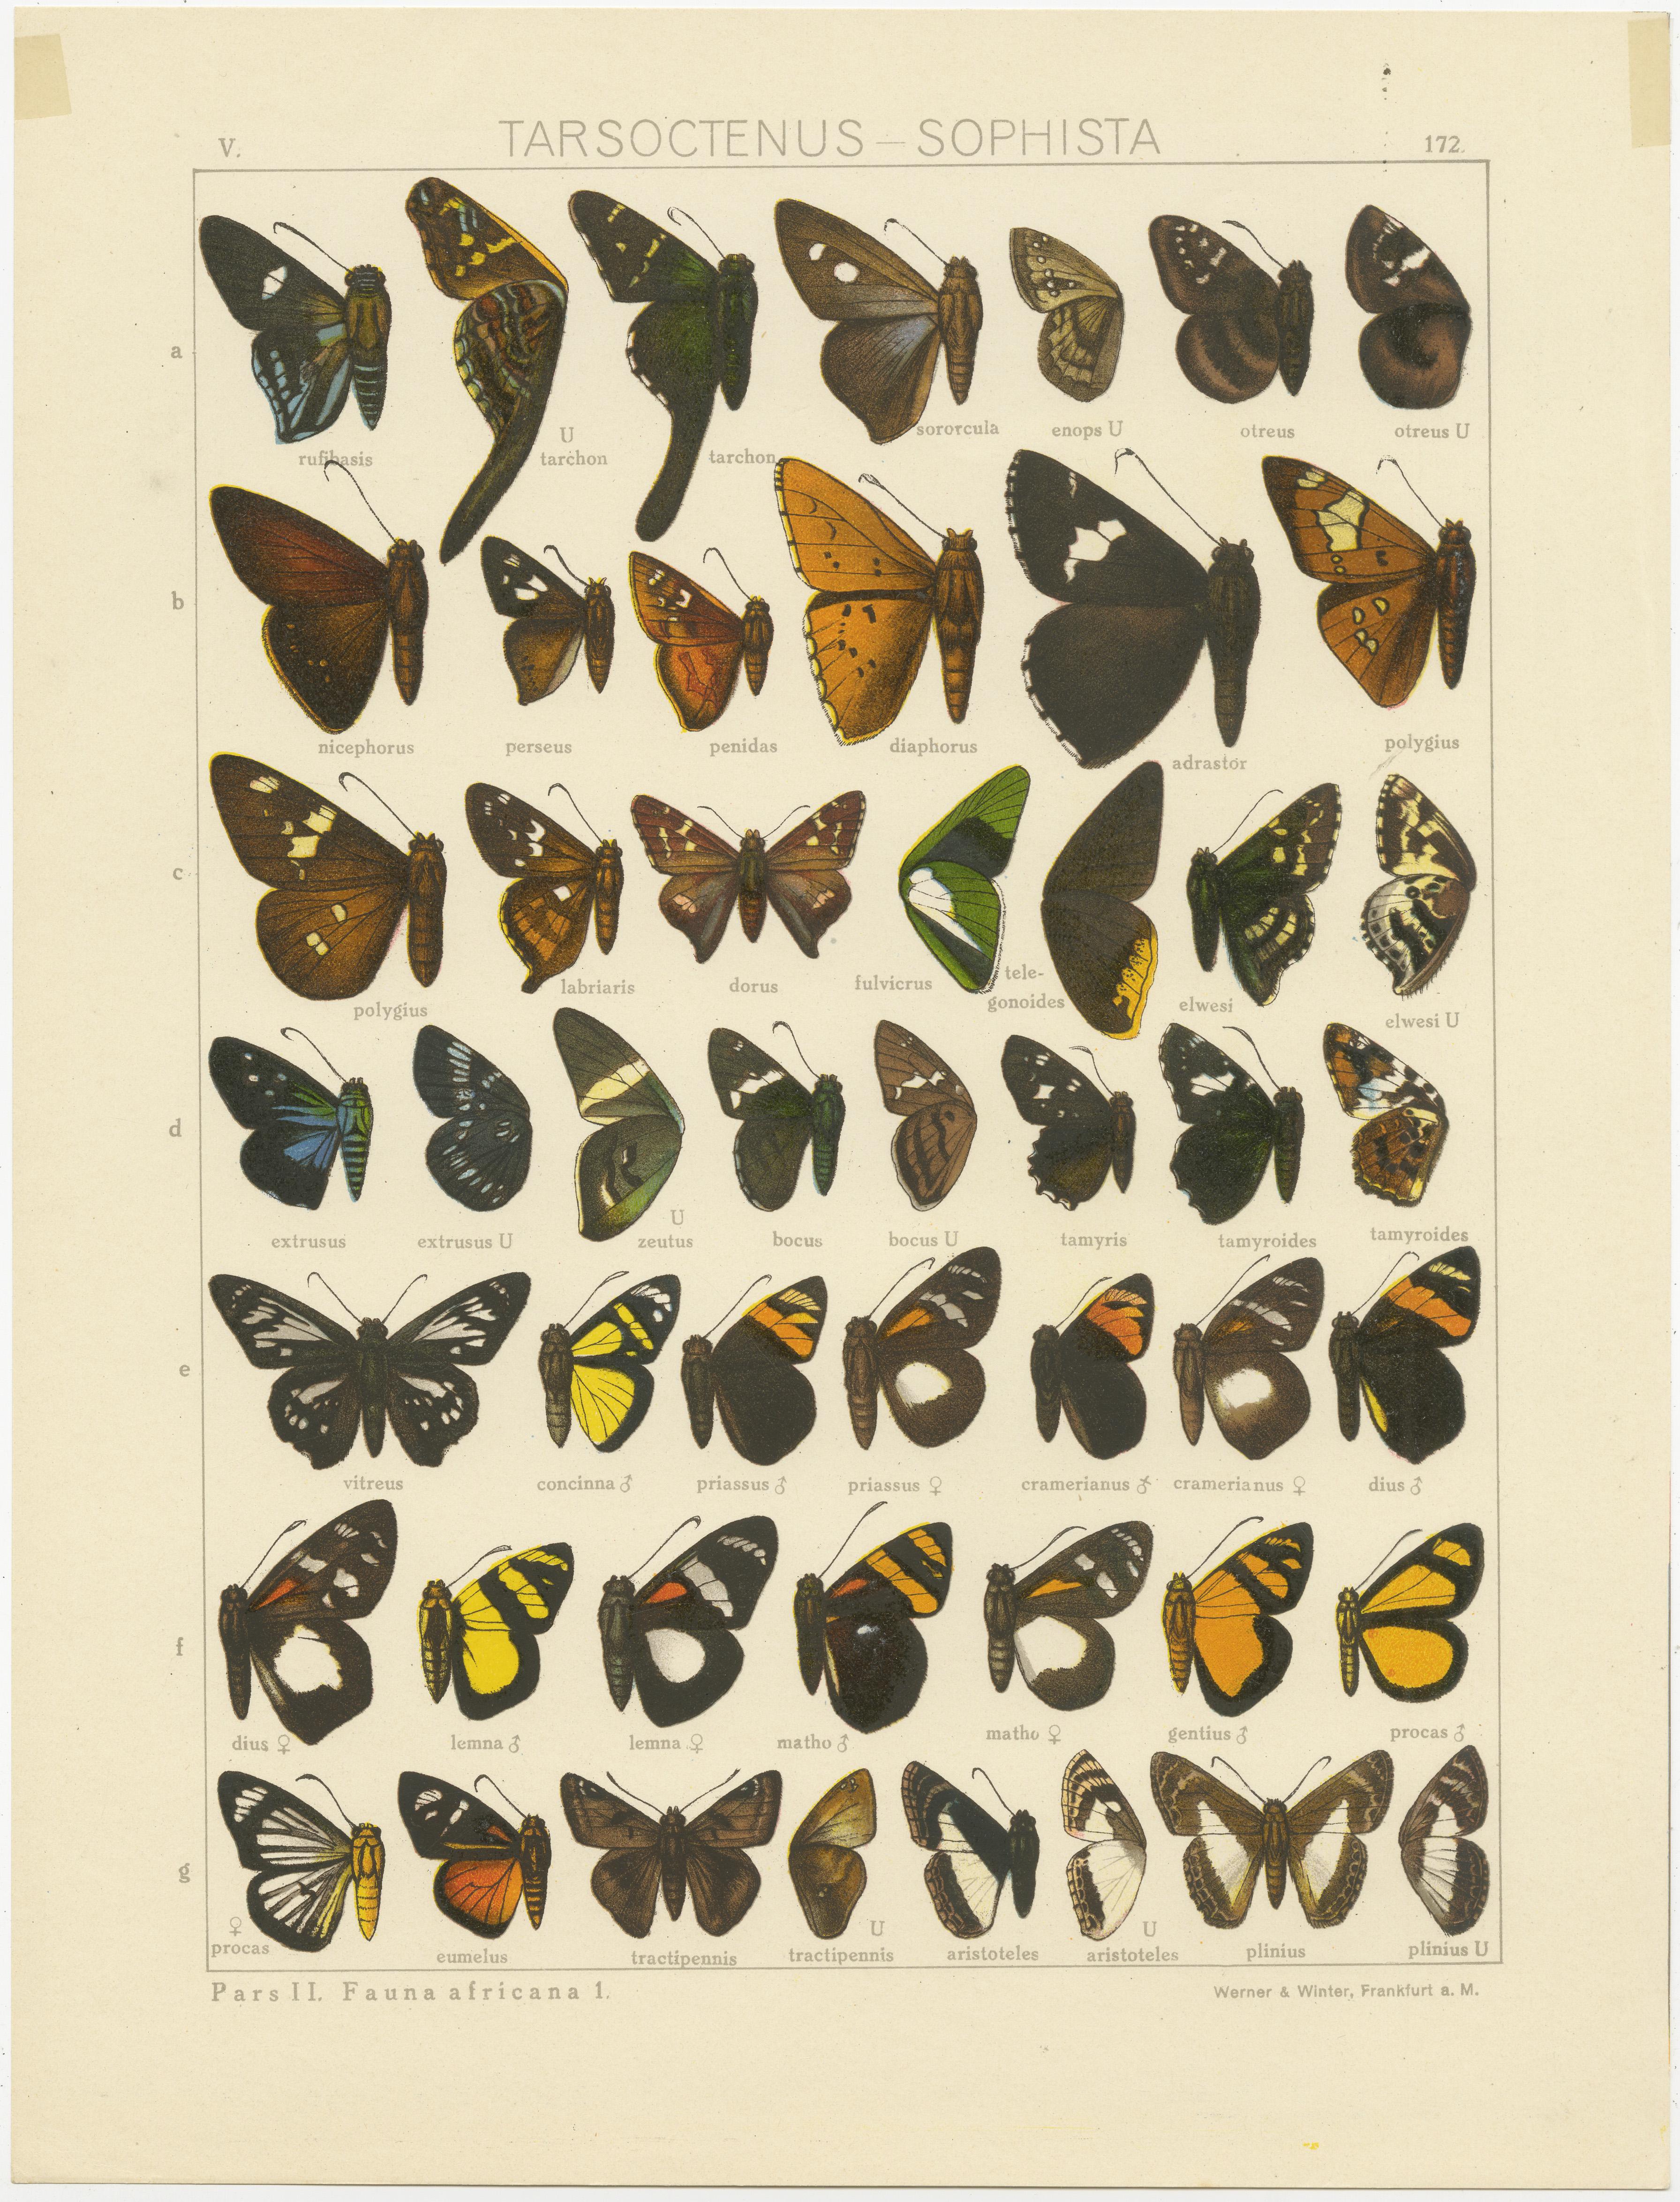 Set of two antique butterfly prints titled 'Tarsoctenus - Sophista' and 'Lycas - Argopteron'. It shows butterflies of Africa and America. These prints originate from 'Die Großschmetterlinge der Erde' published circa 1910. 

The prints display a